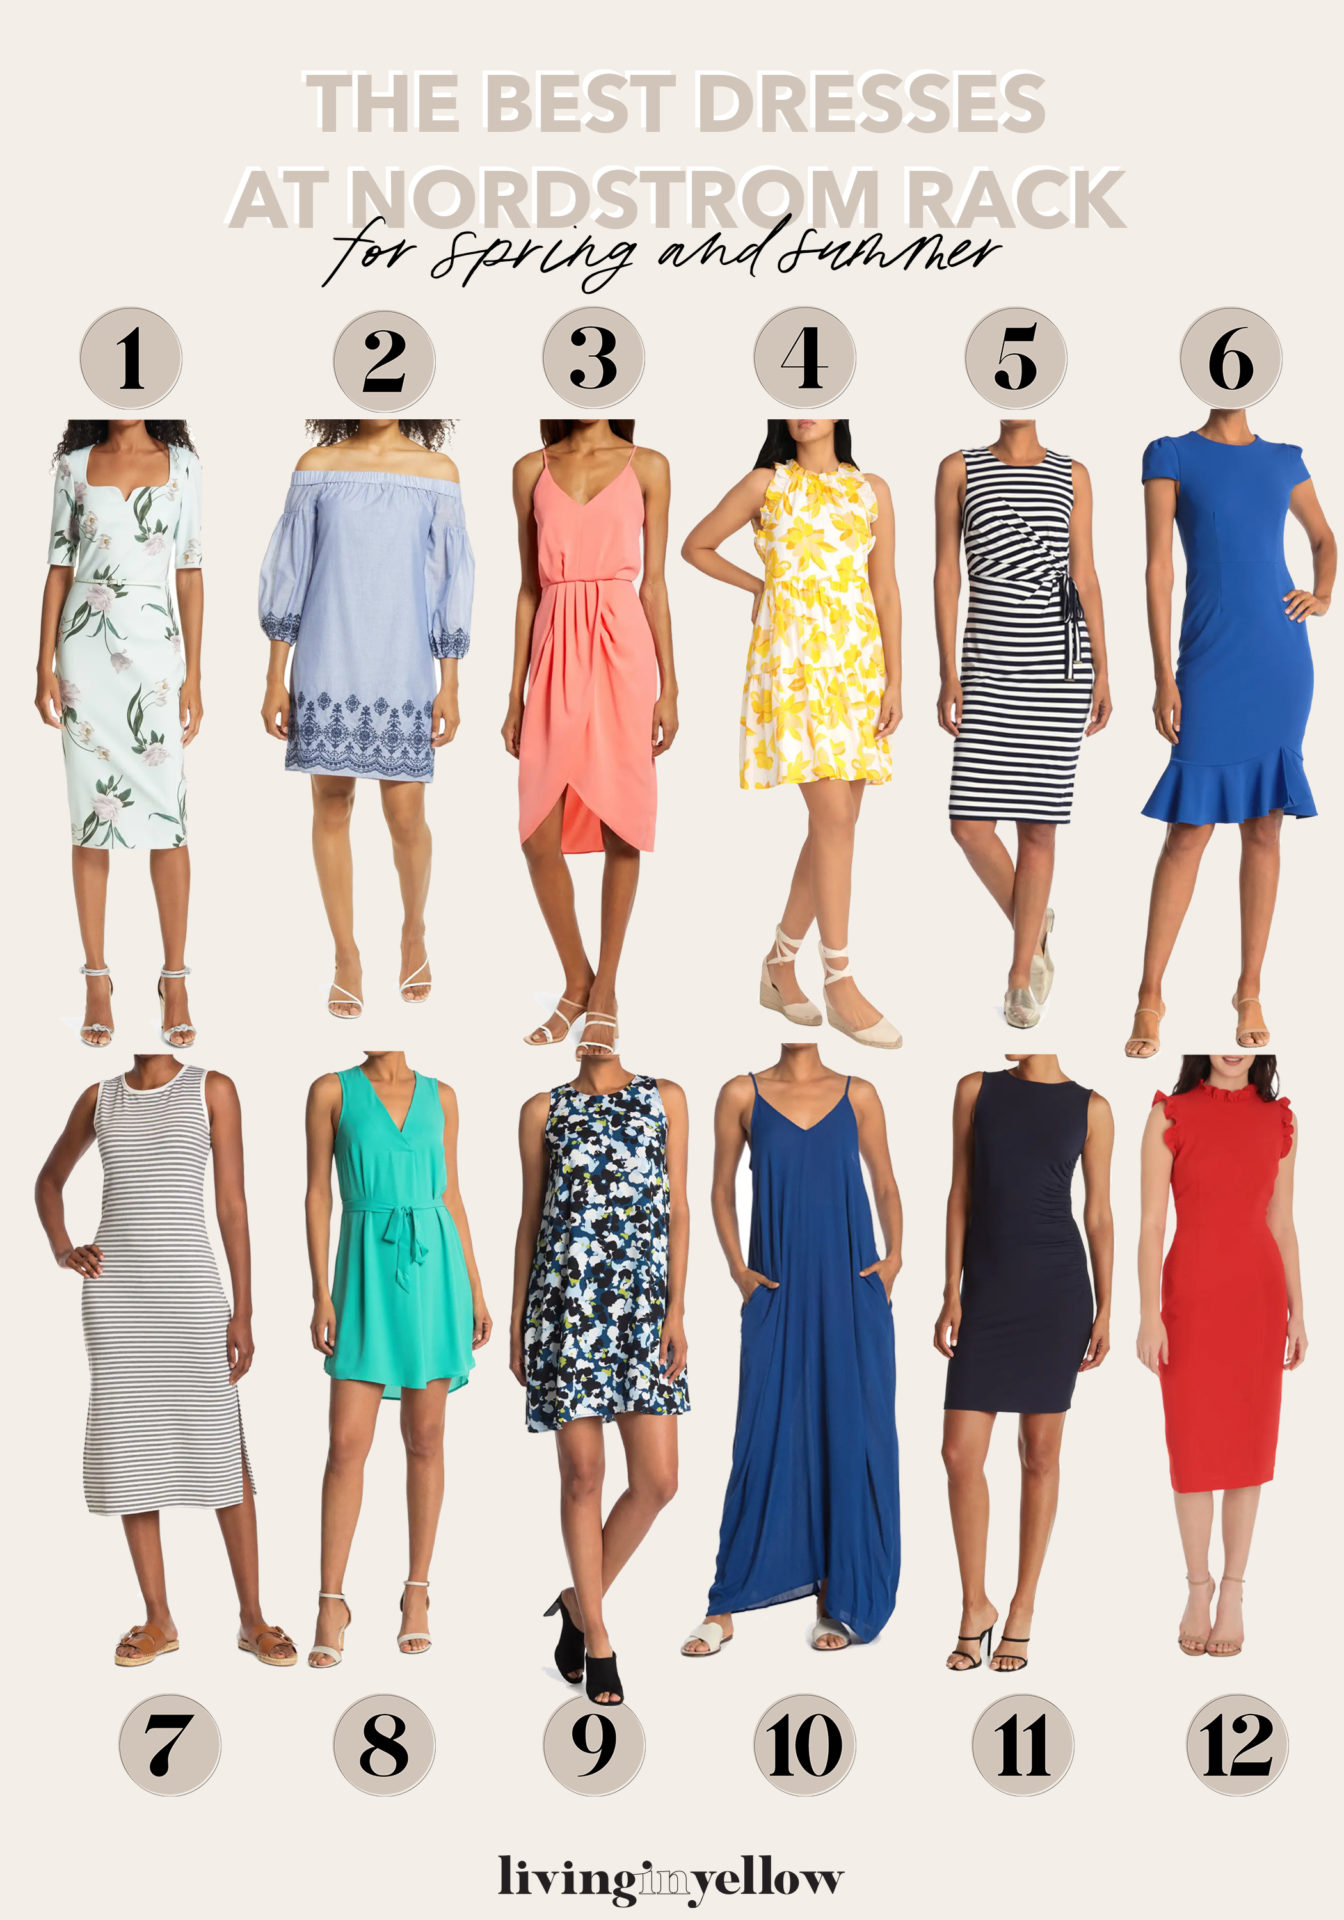 12 Dresses for Spring & Summer - Living in Yellow